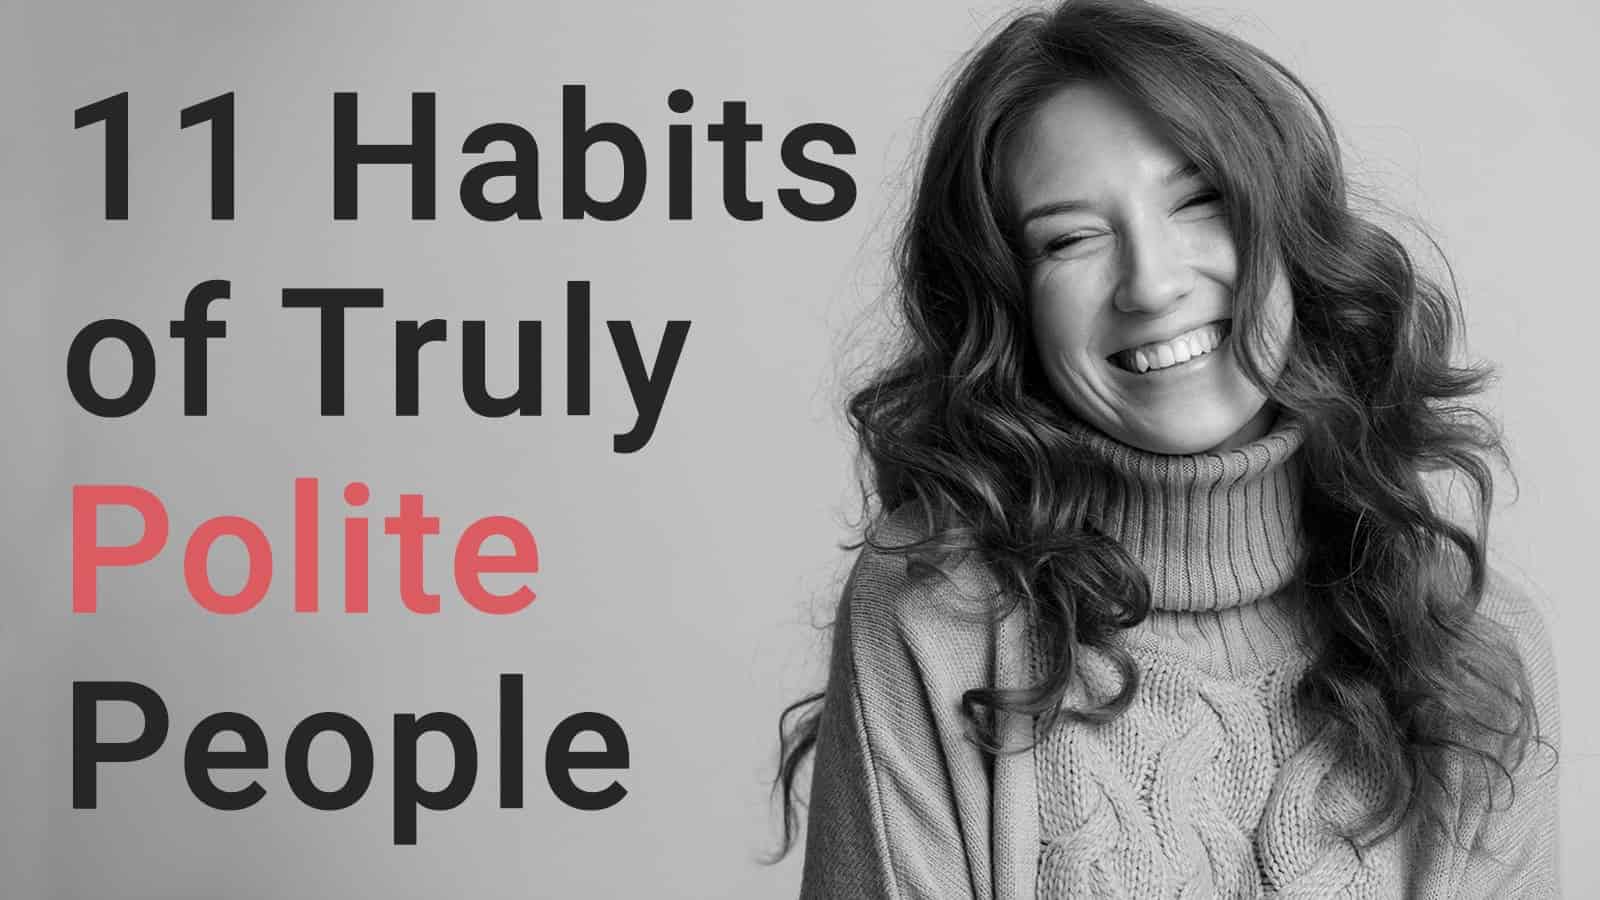 11 Habits of Truly Polite People